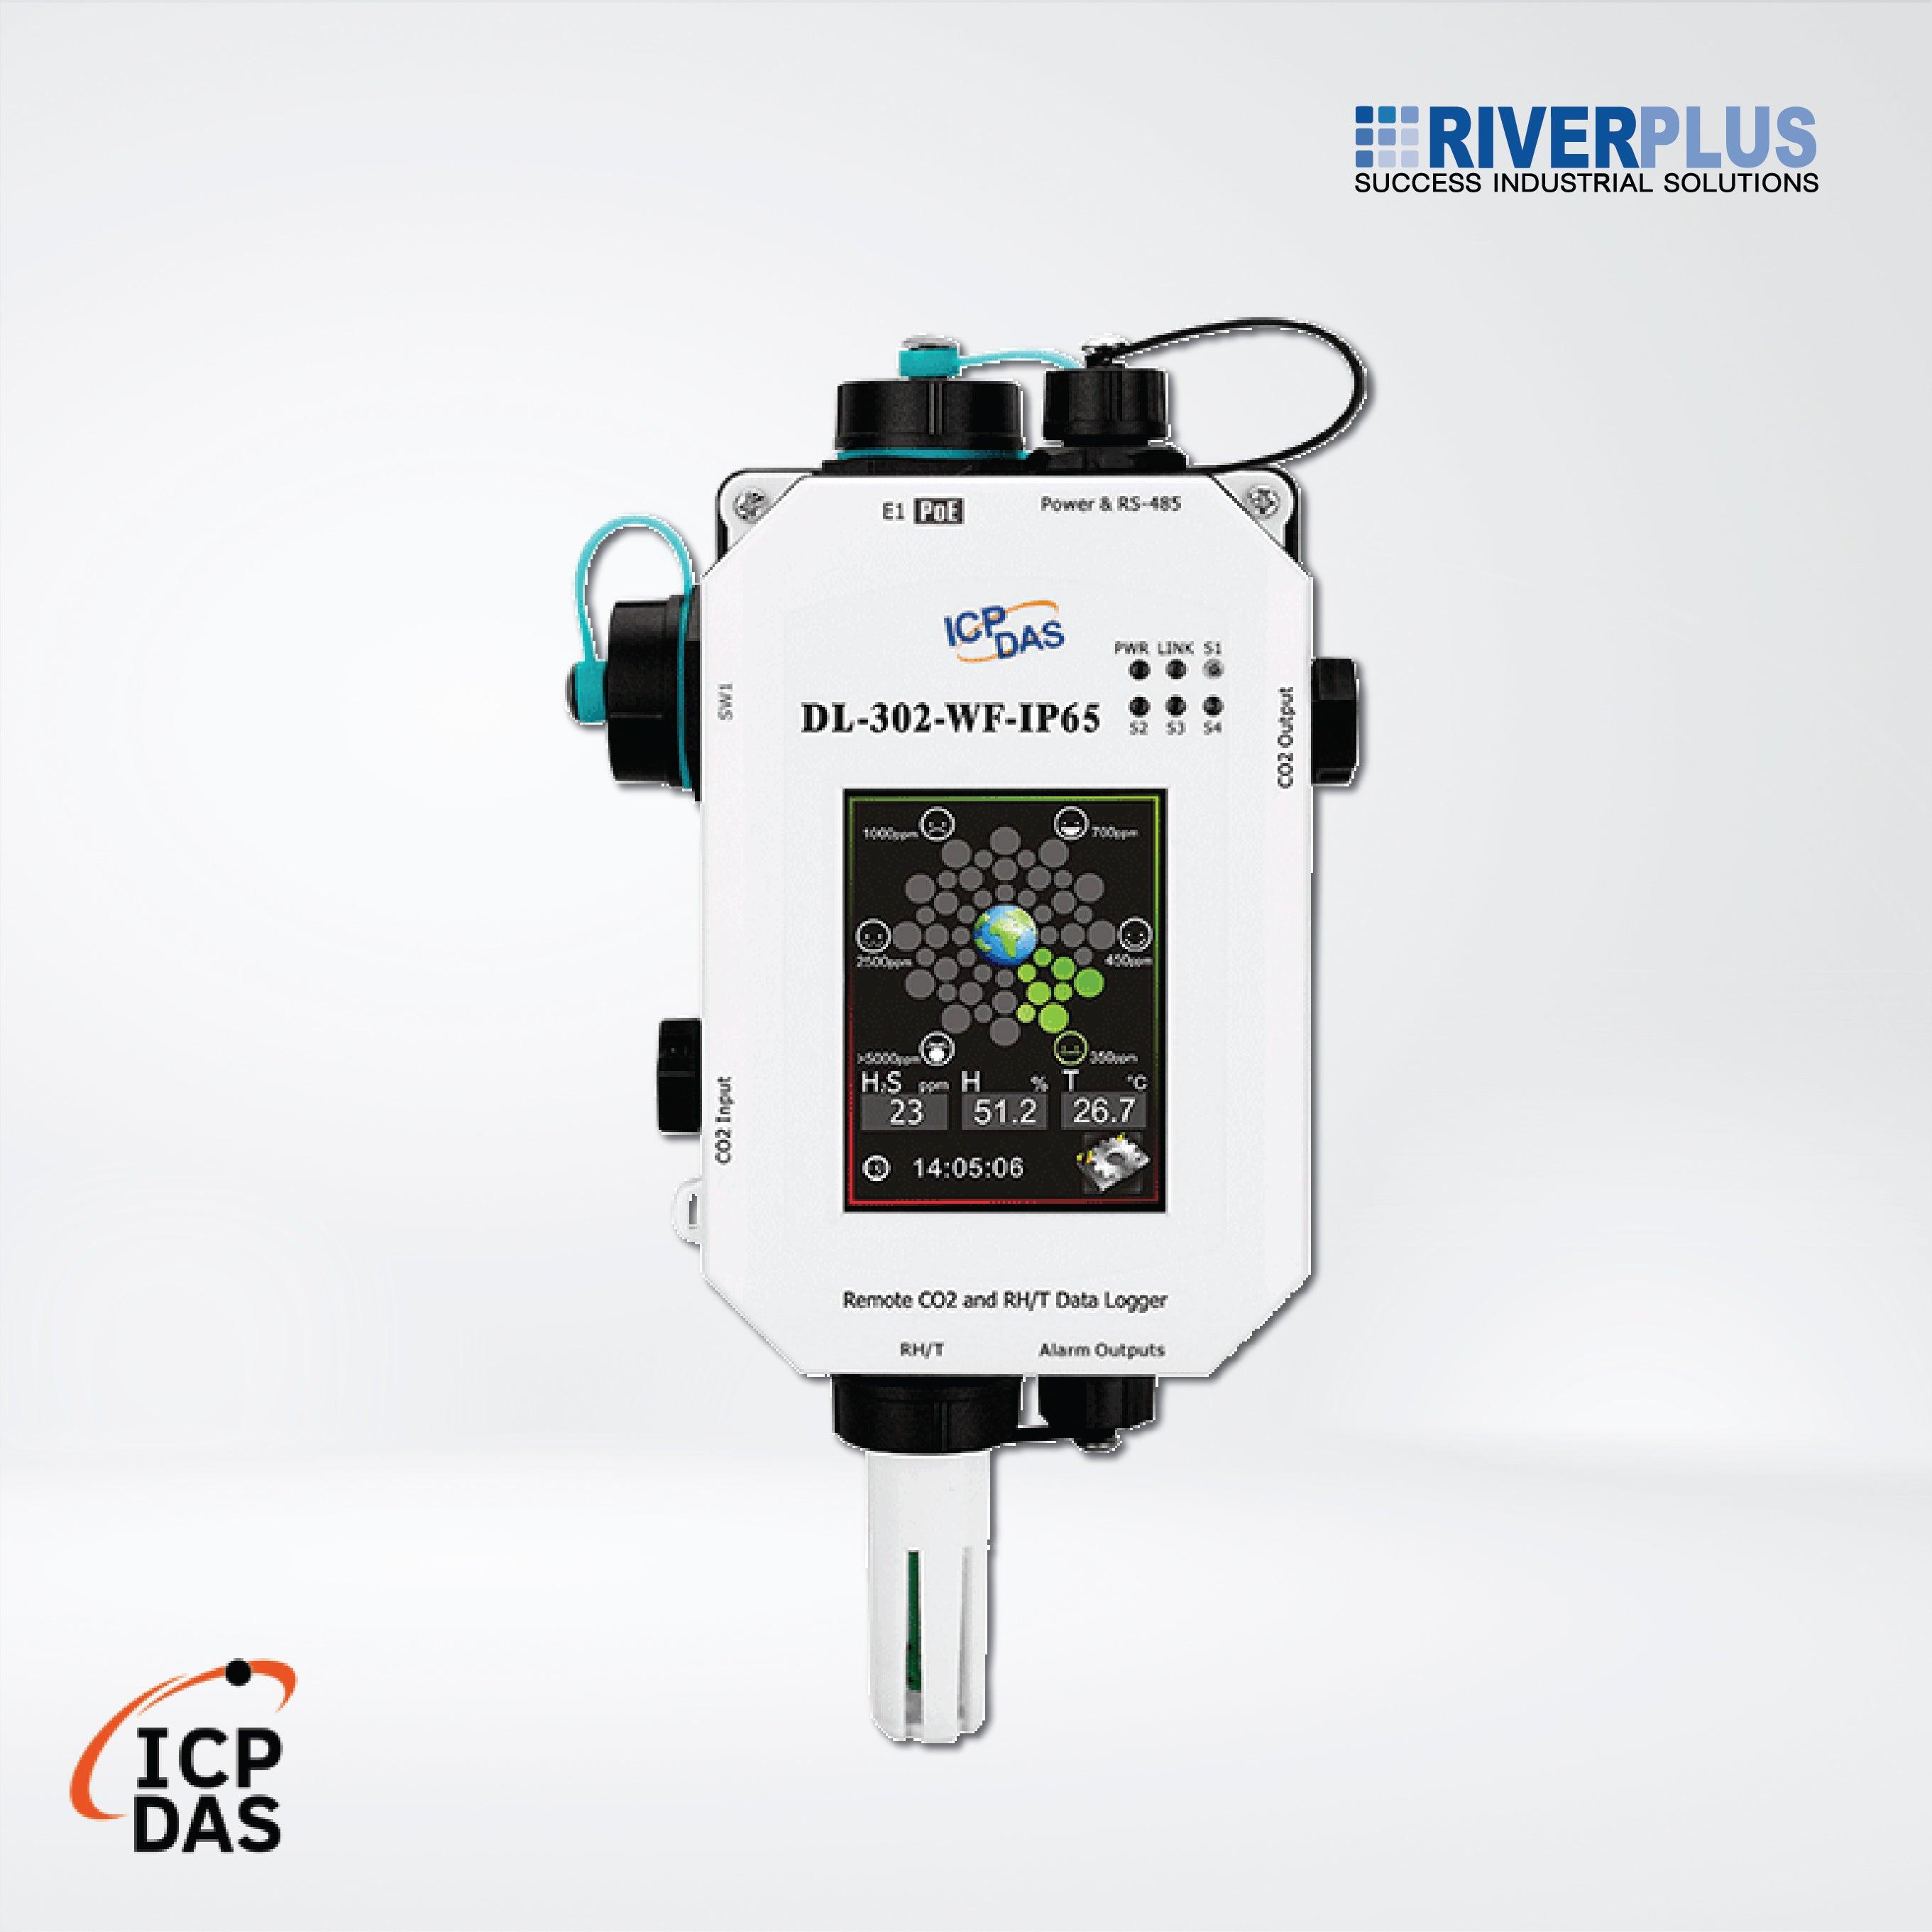 DL-302-WF-IP65 IP65 Remote CO2/Temperature/Humidity/Dew Point Data Logger - Riverplus